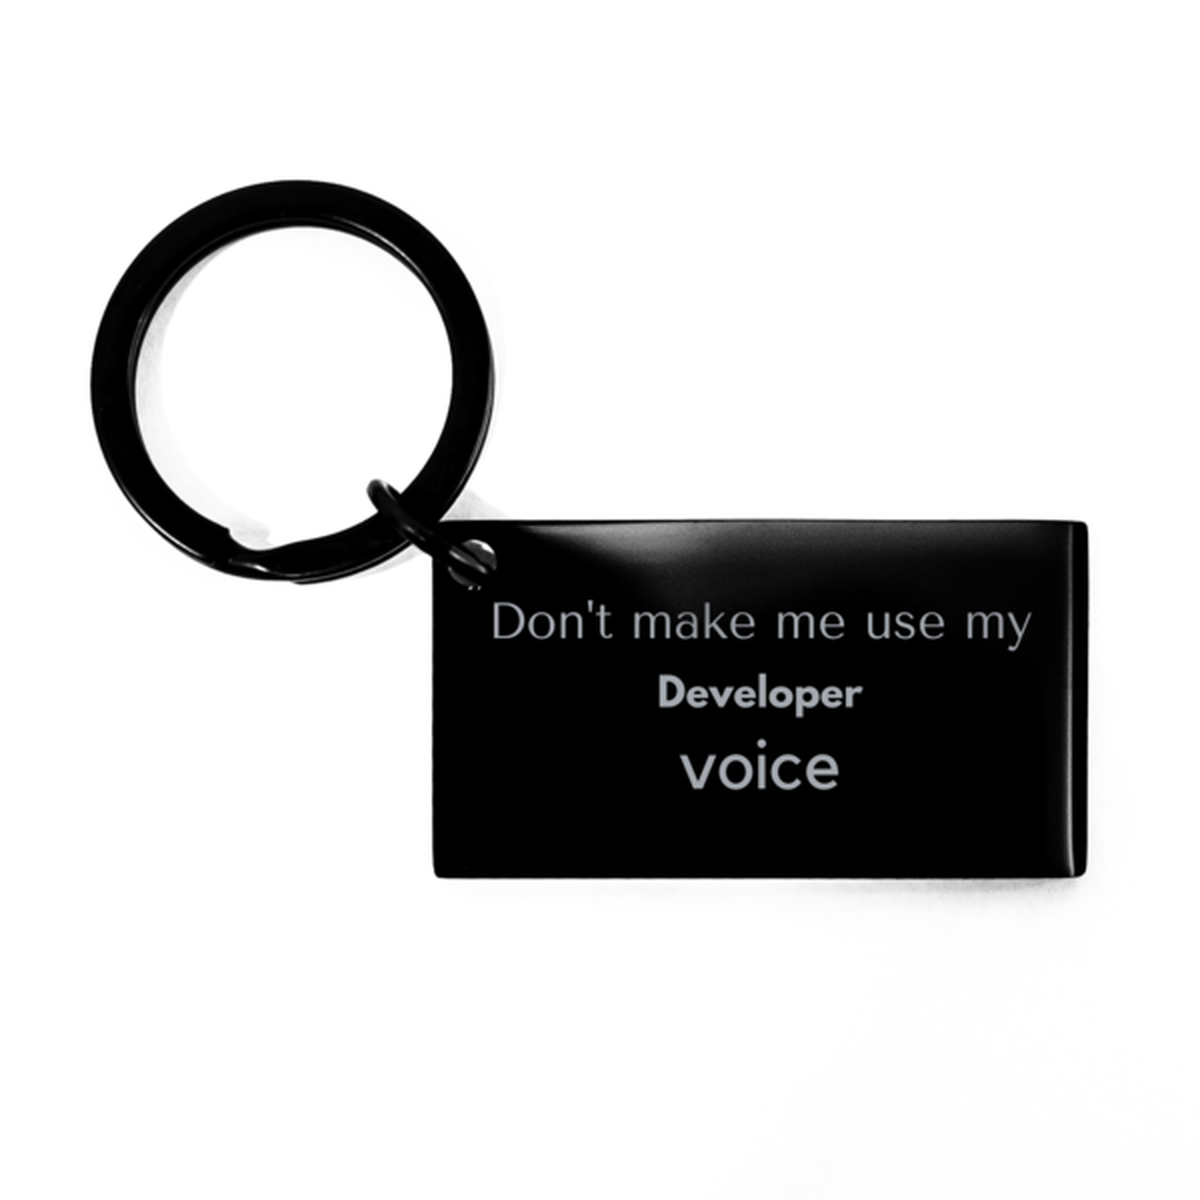 Don't make me use my Developer voice, Sarcasm Developer Gifts, Christmas Developer Keychain Birthday Unique Gifts For Developer Coworkers, Men, Women, Colleague, Friends